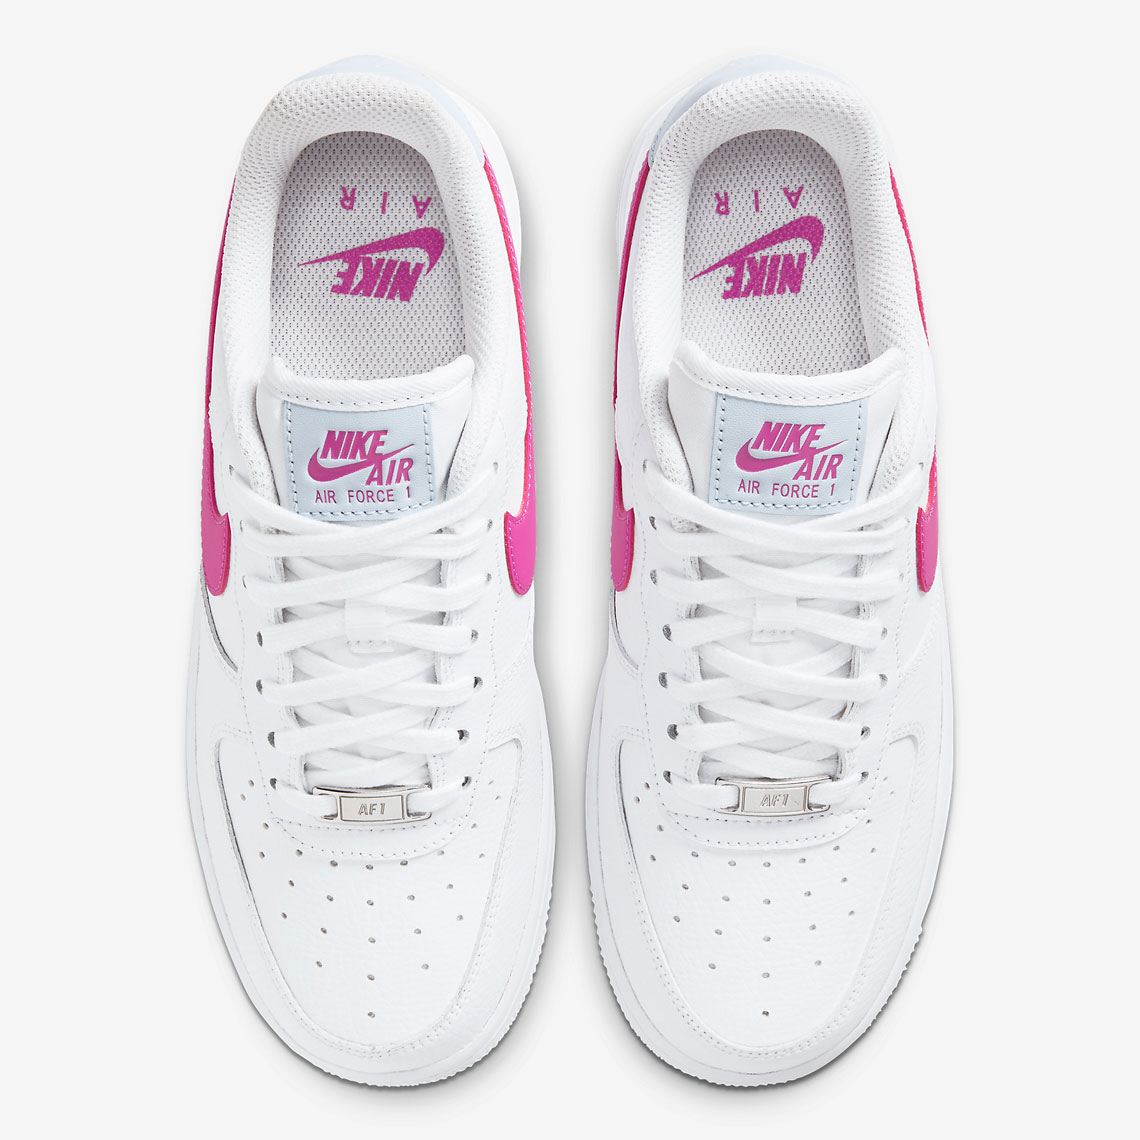 Nike Air Force 1 Low Wmns Ct4328 101 4